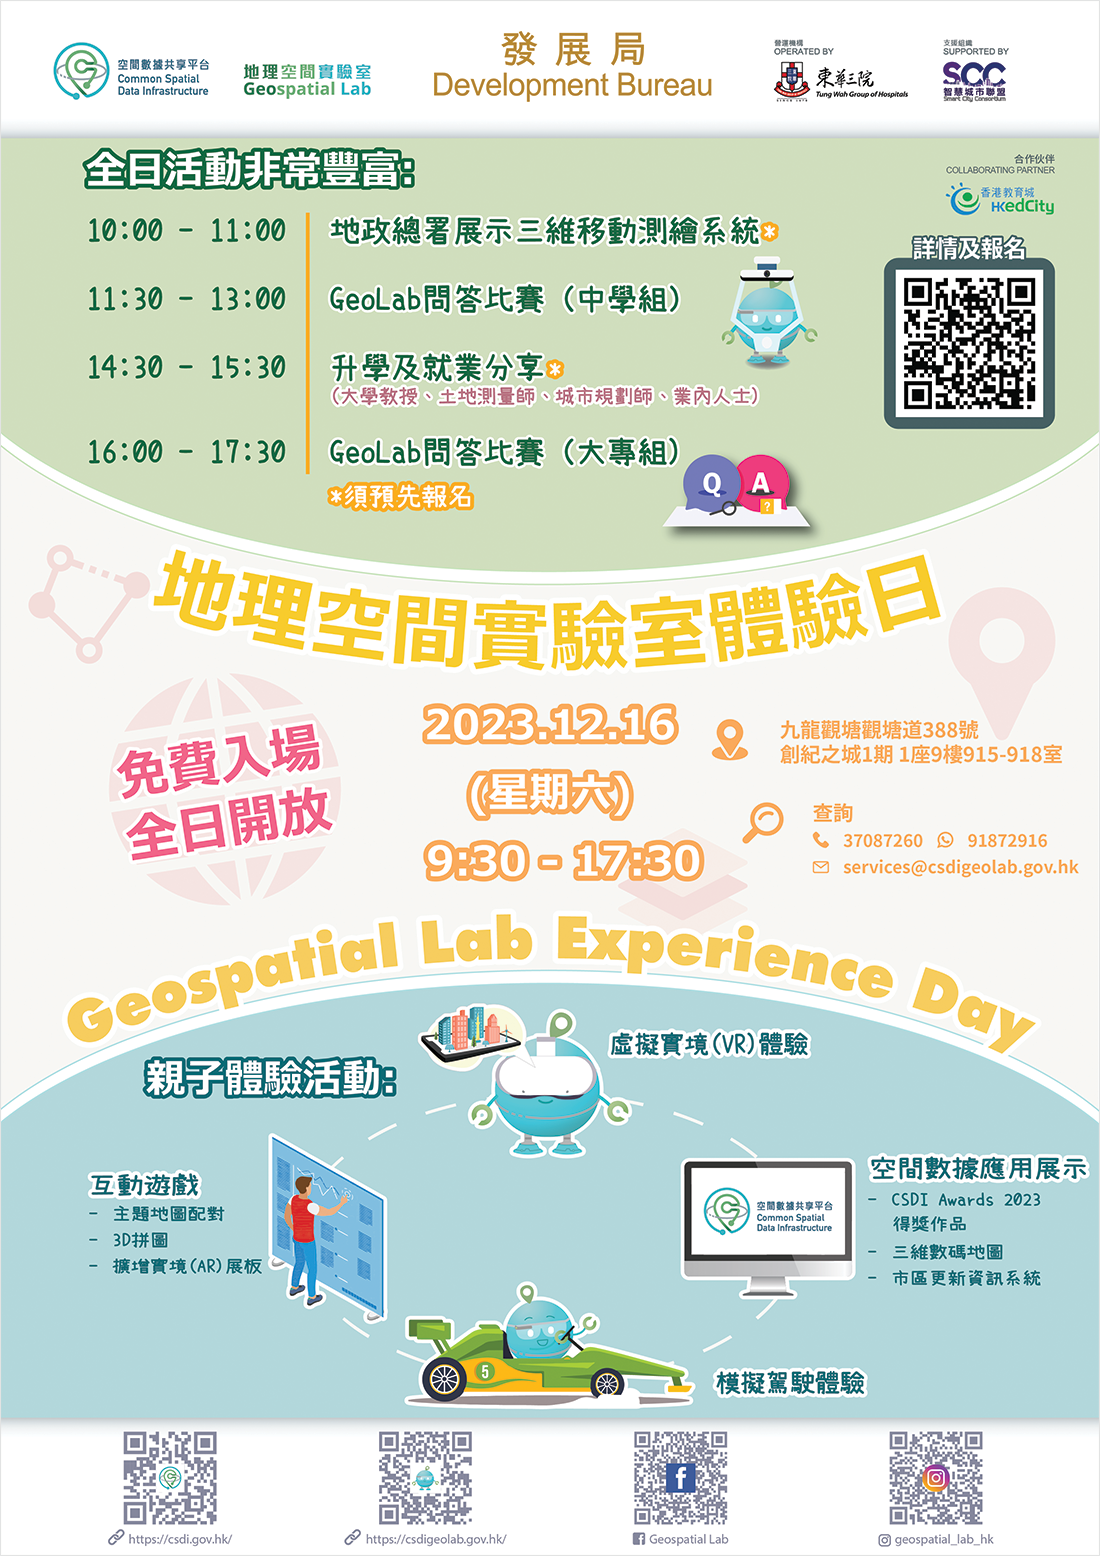 Poster of Experience Day